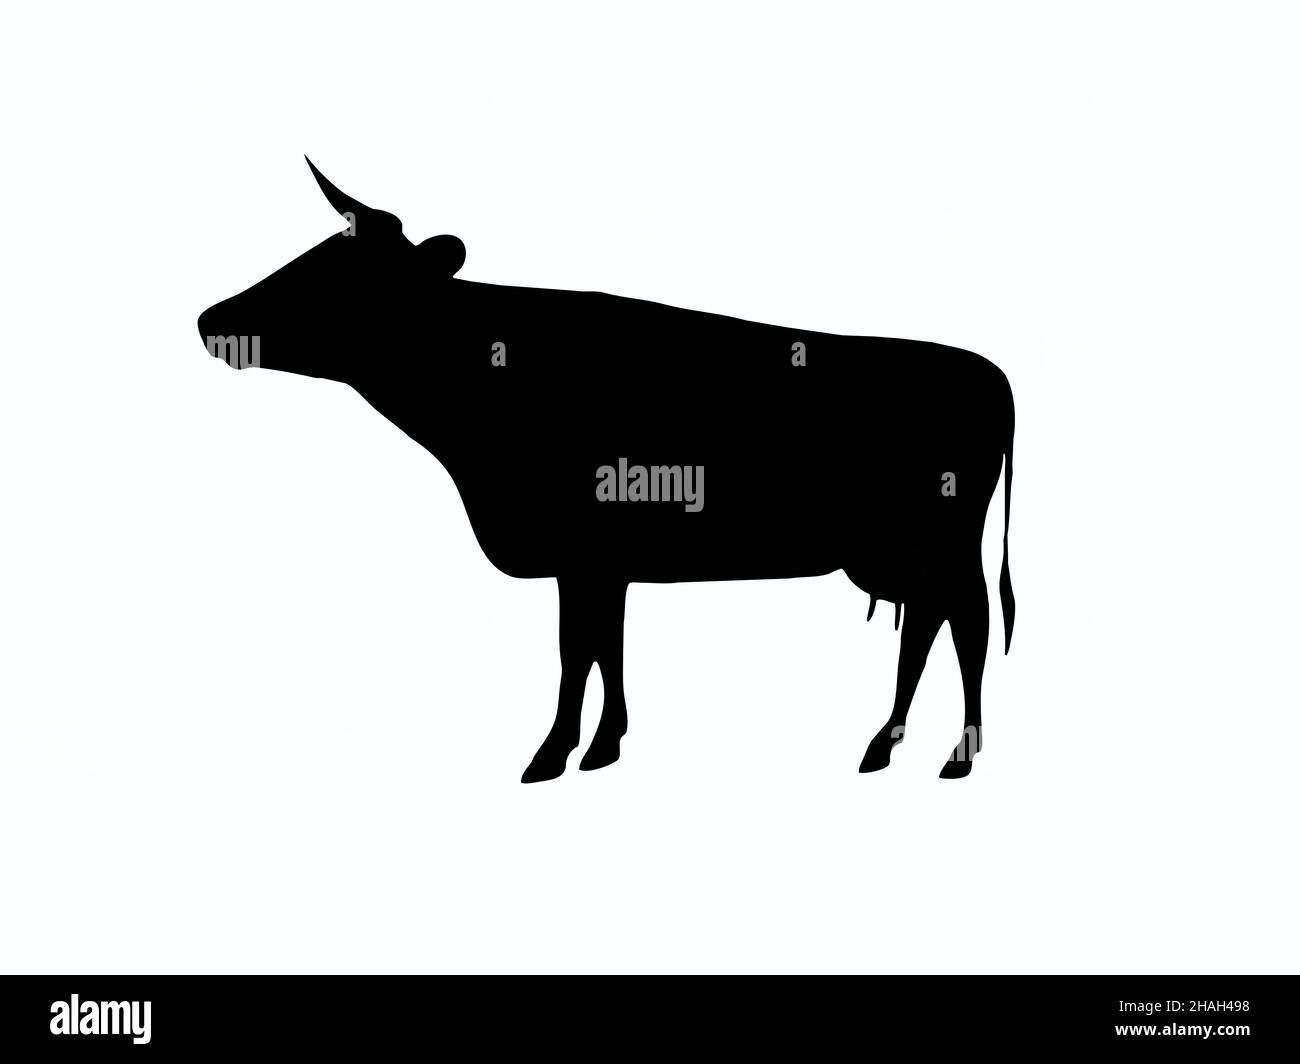 Black cow shape illustration on white clipping background in the center of the frame Stock Photo